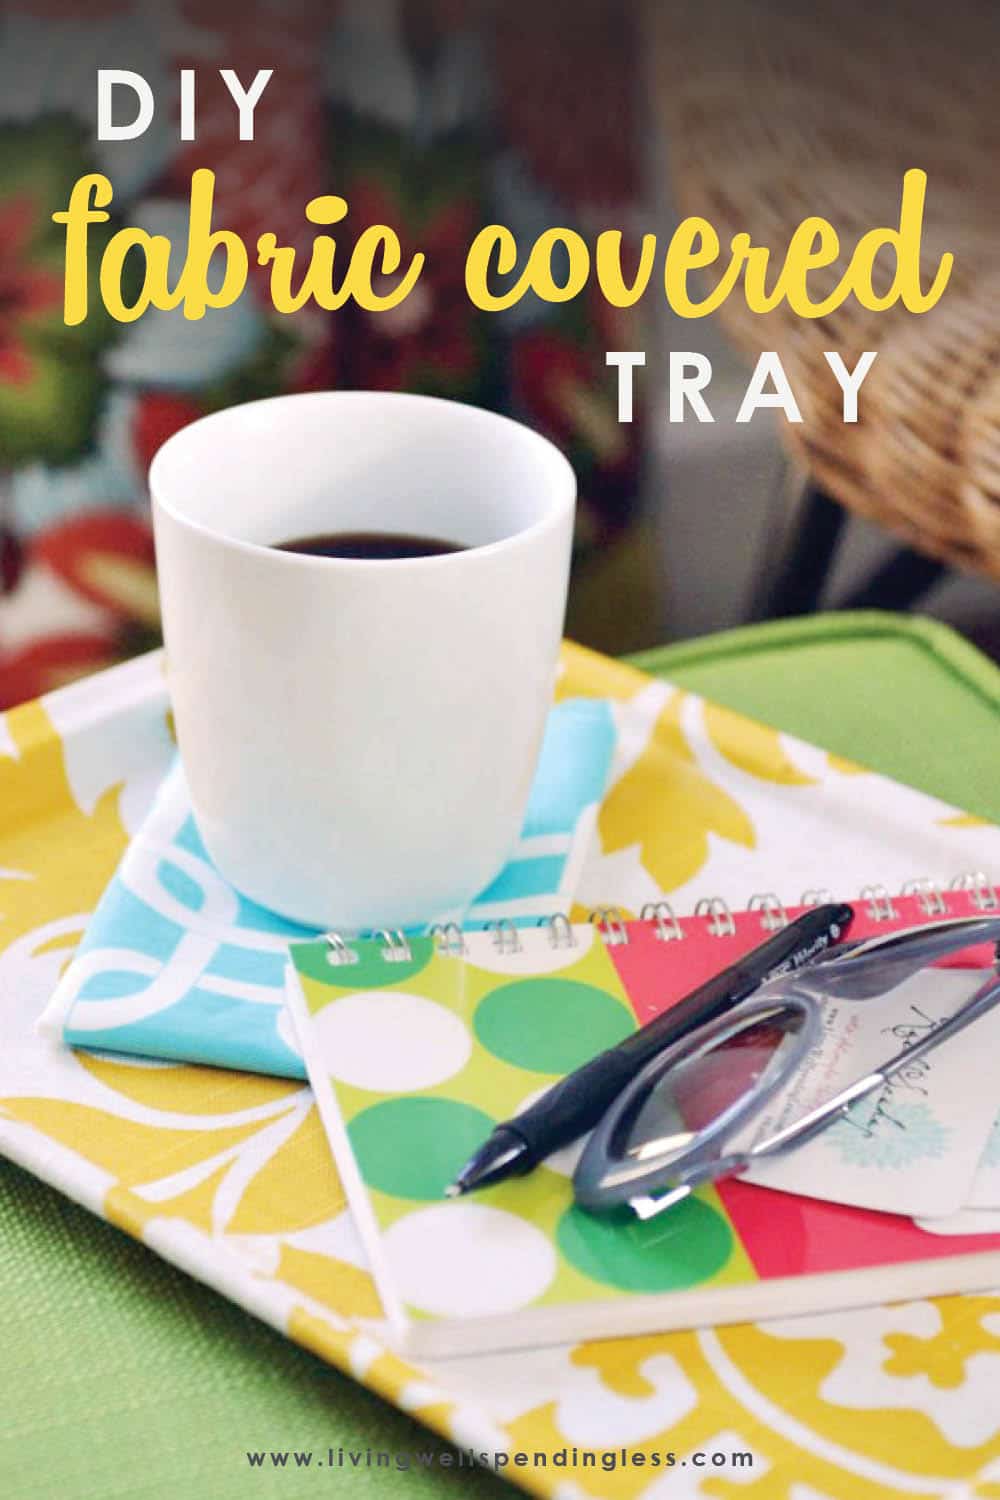 Are you looking for an easy project to brighten up your workspace? This DIY fabric covered tray is super cute and perfect for any office! #DIY #easycrafts #fabriccrafts